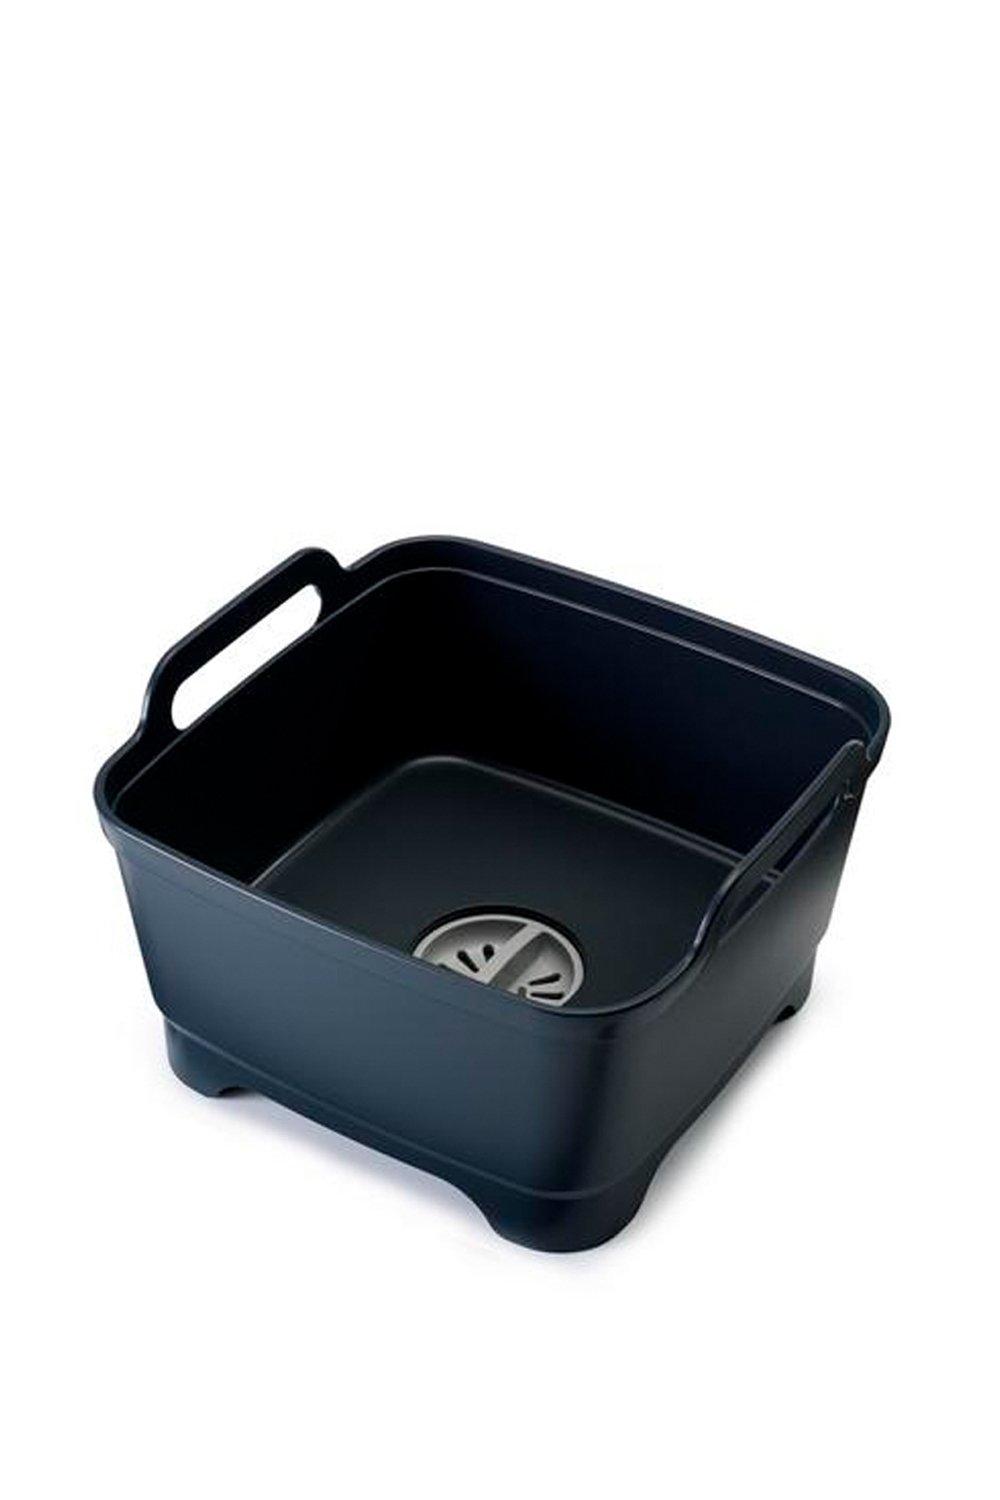 Picture of Wash And Drain Dishwashing Bowl